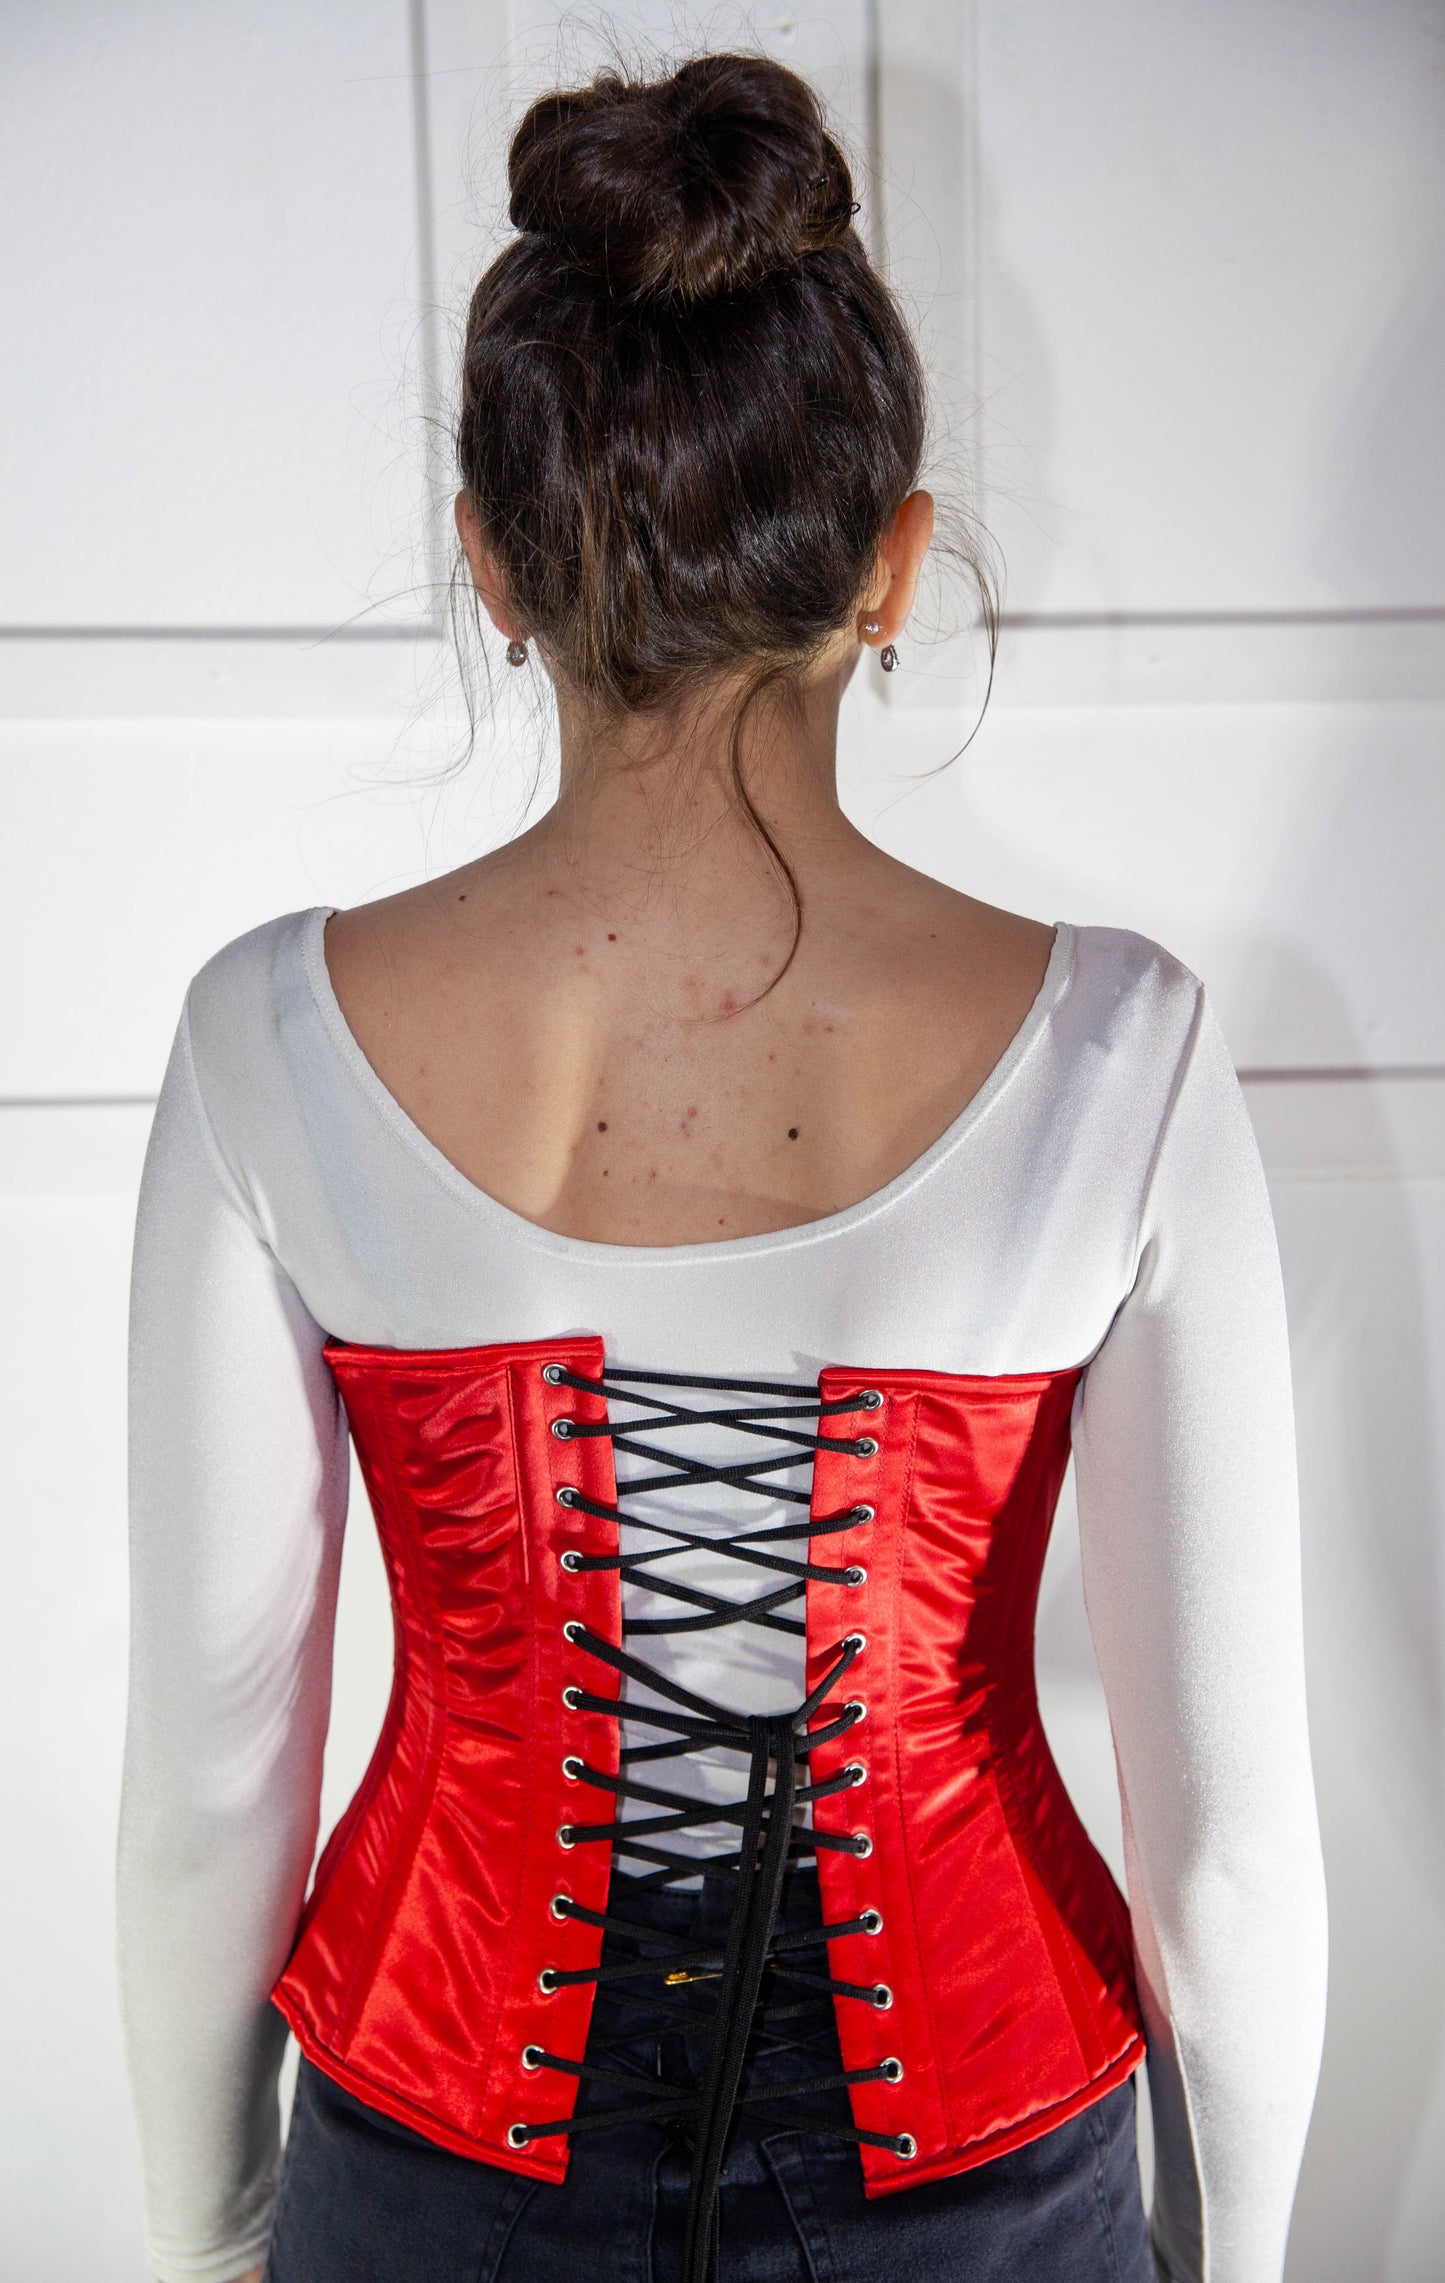 Corset - Red Satin Underbust with Clasps